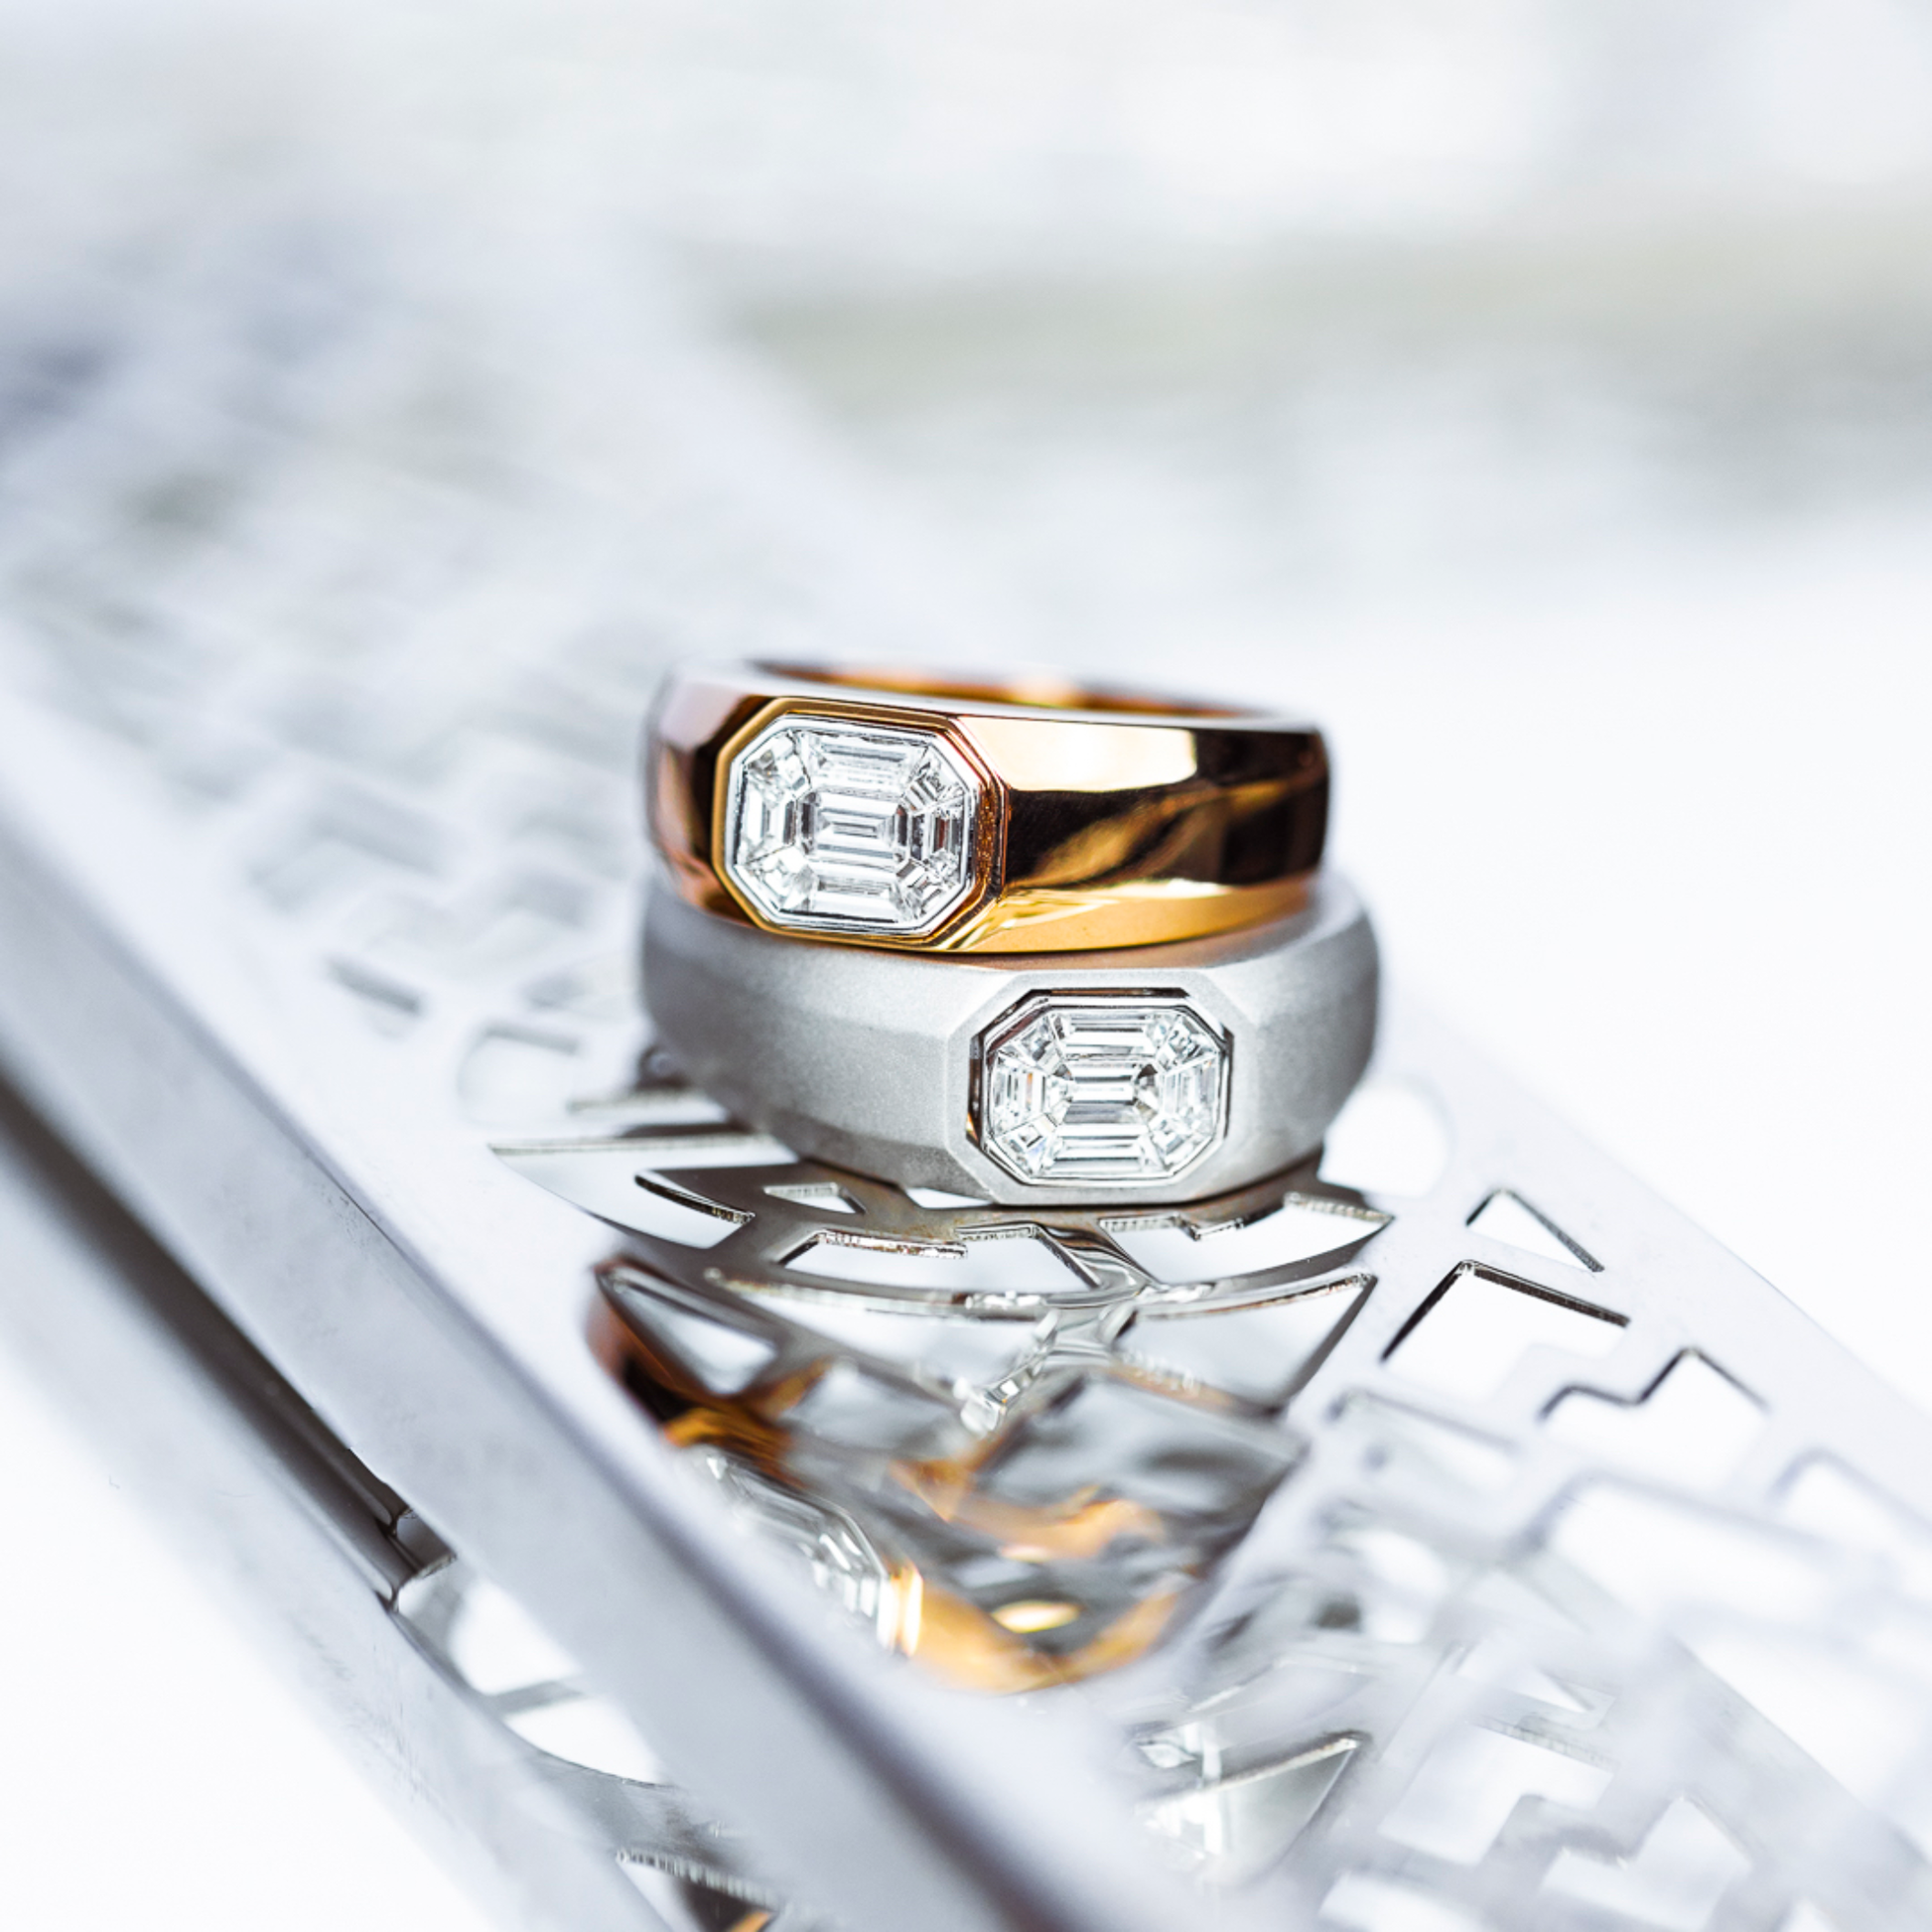 Oliver Heemeyer Mael men´s diamond ring made of 18k rose gold. Different perspective.